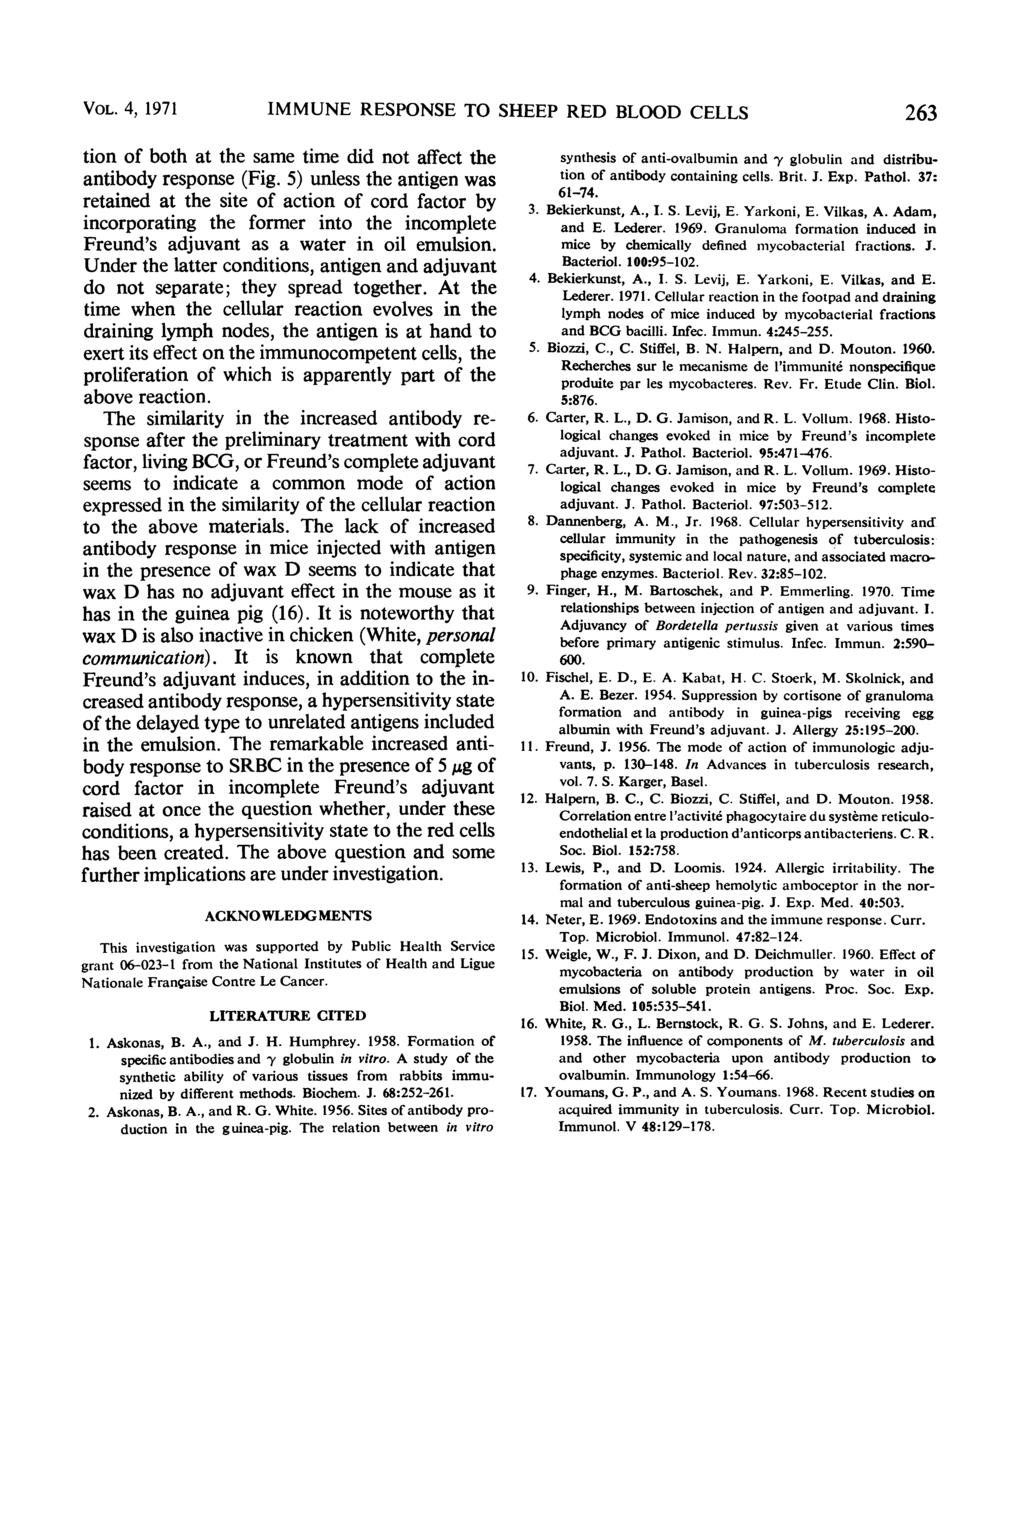 VOL. 4, 1971 MMUNE RESPONSE TO SEEEP RED BLOOD CELLS 263 tion of both at the same time did not affet the antibody response (Fig.